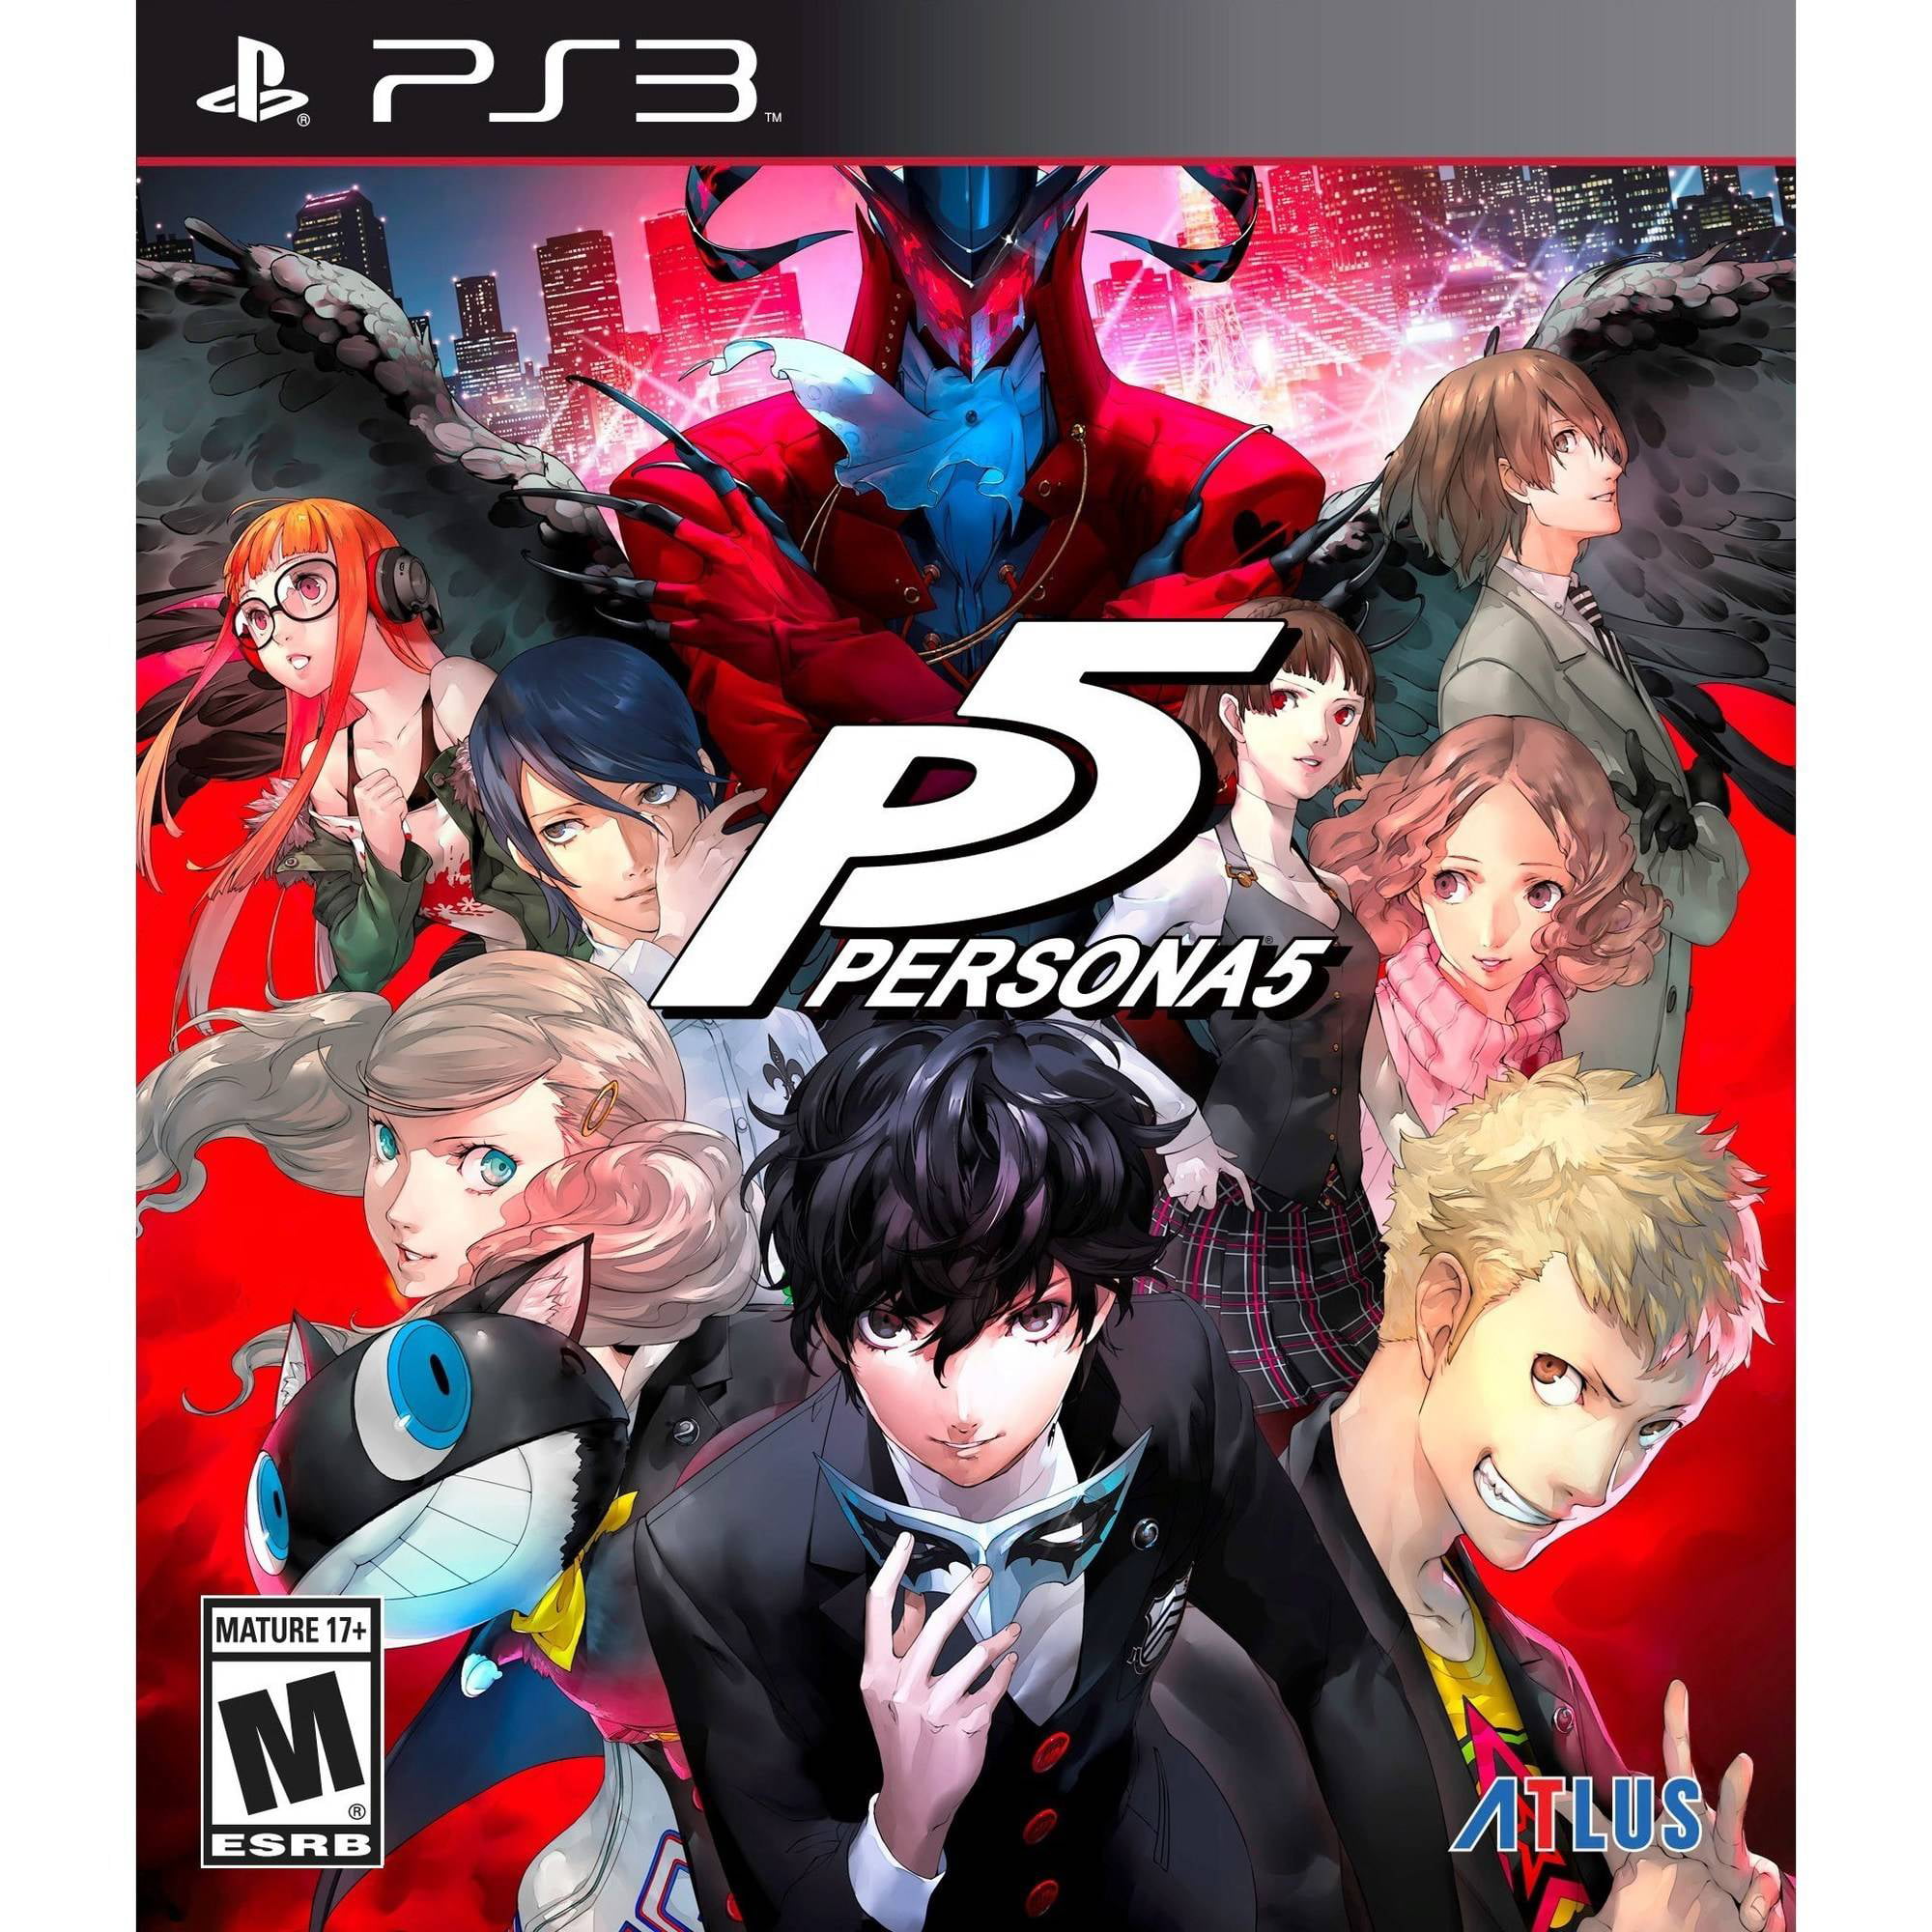 Persona 5 for PlayStation 3 Atlus 